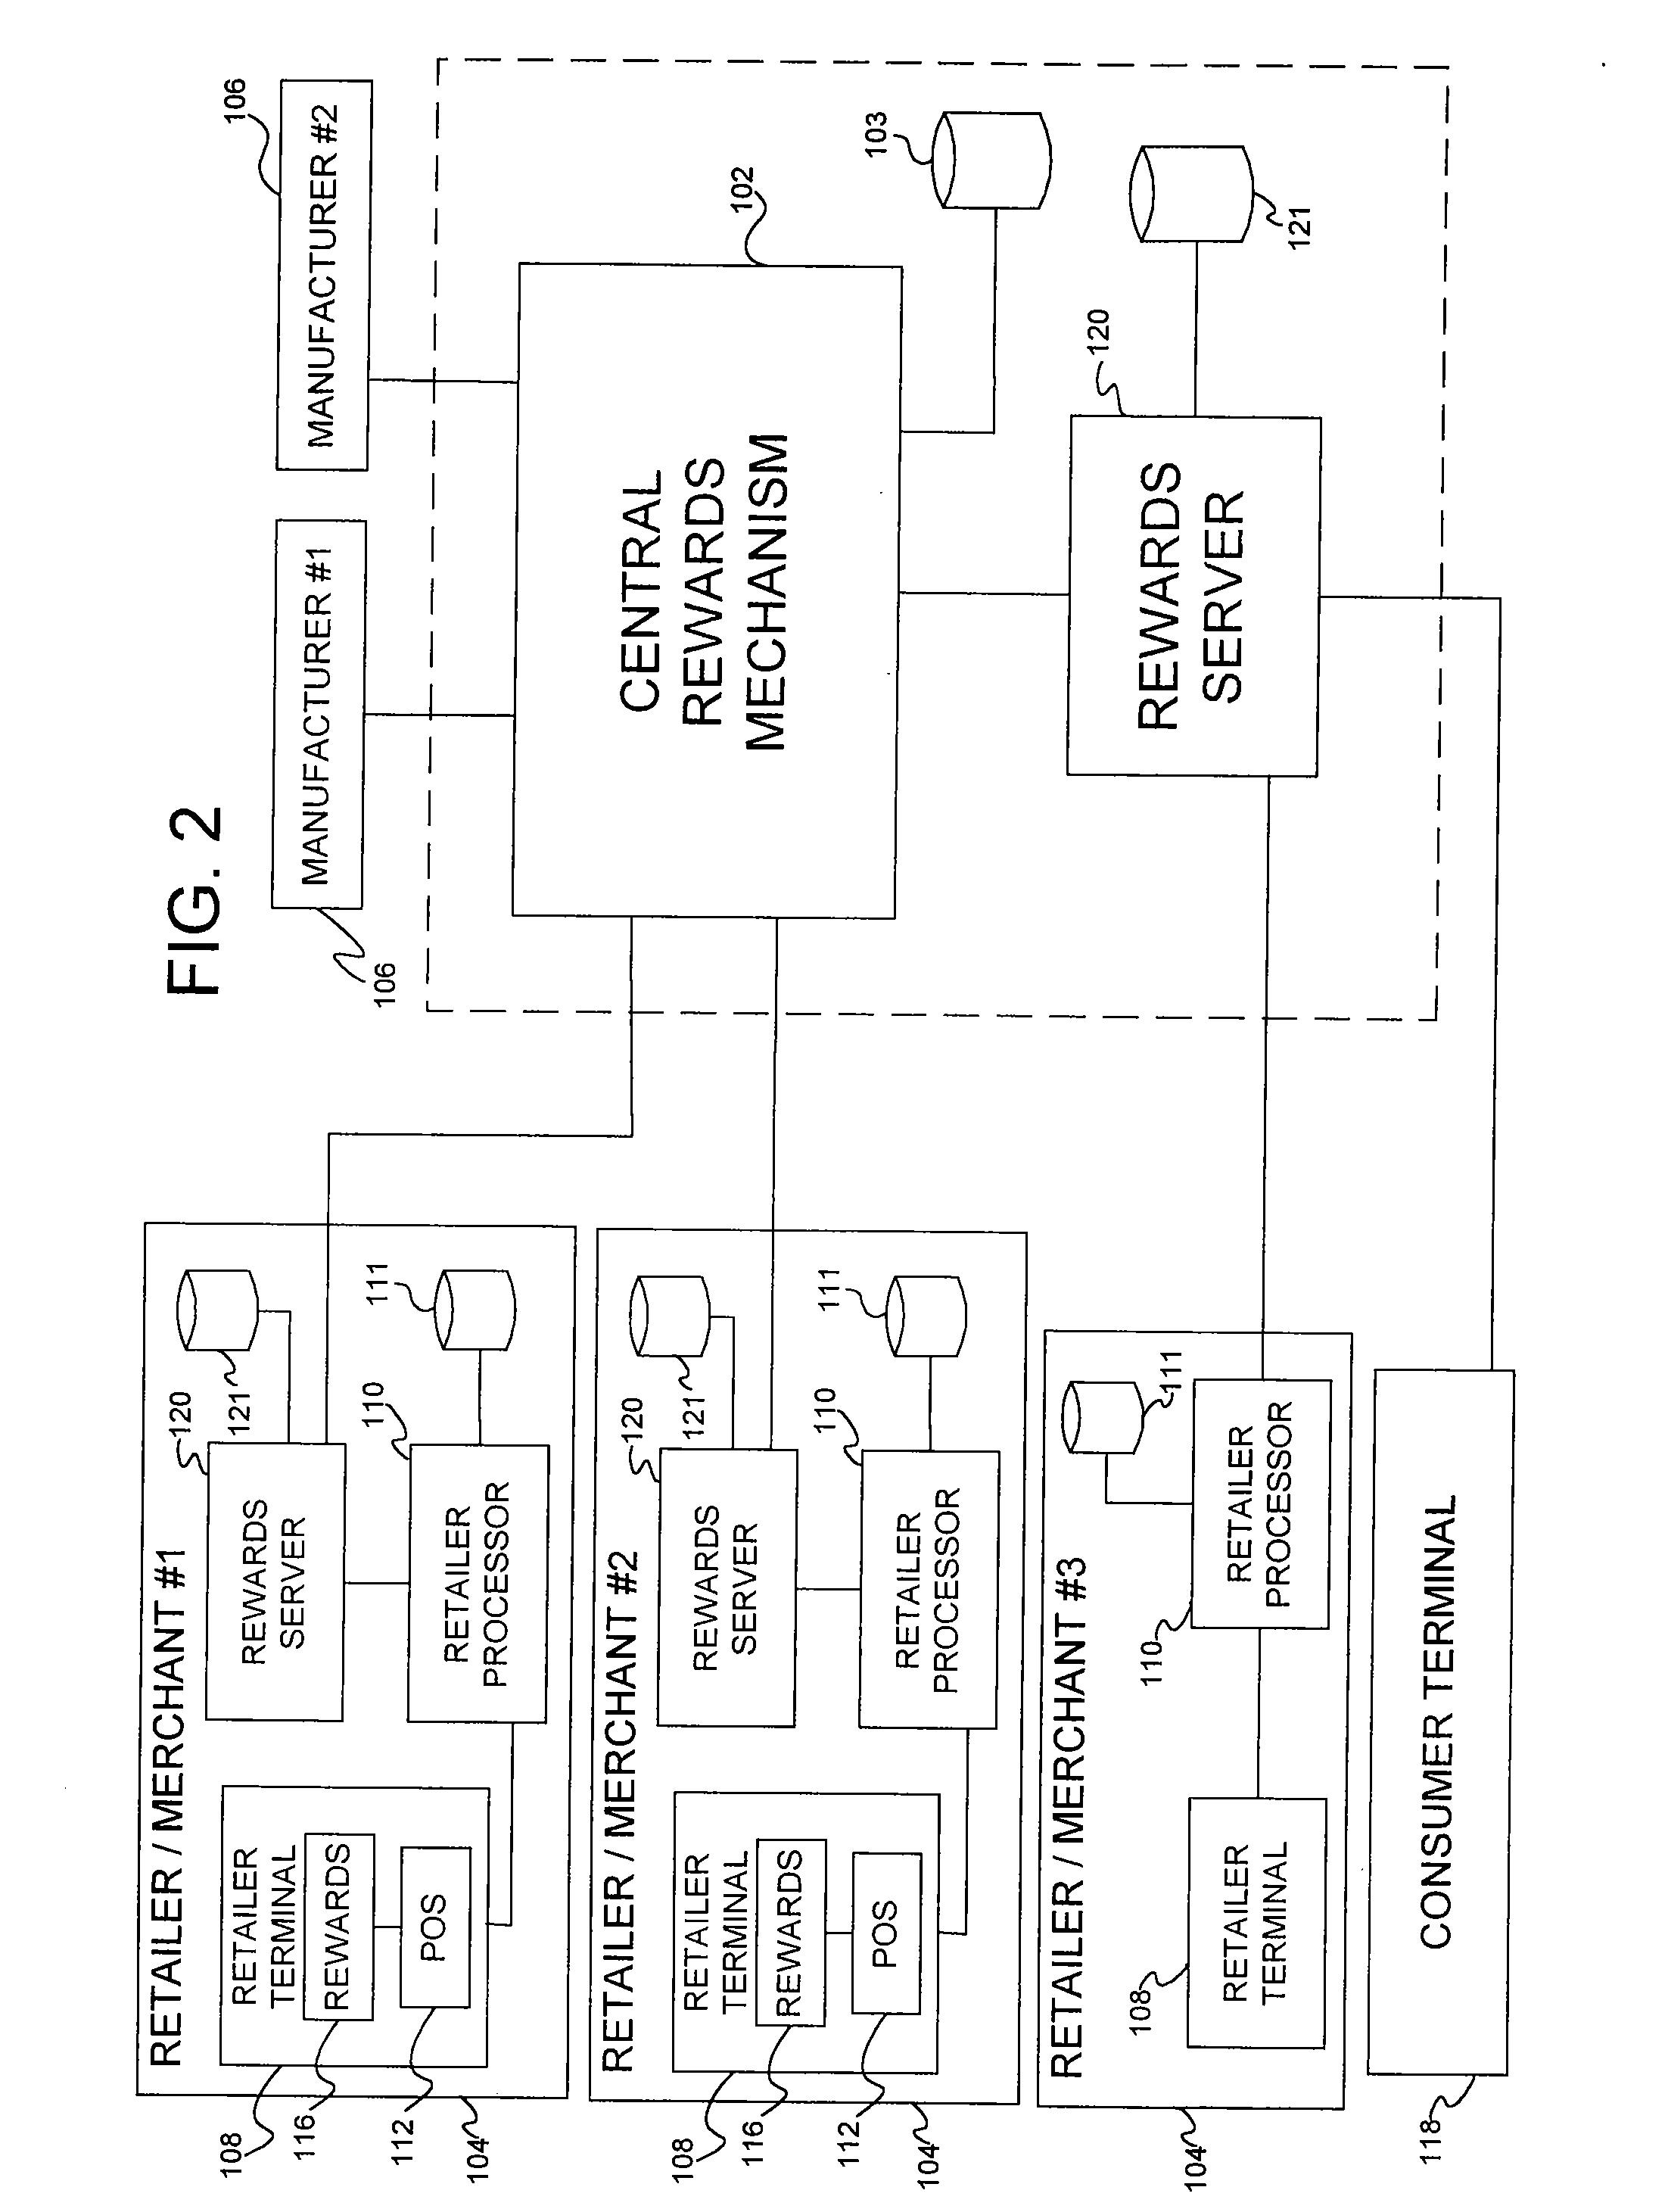 System and method for a merchant loyalty system